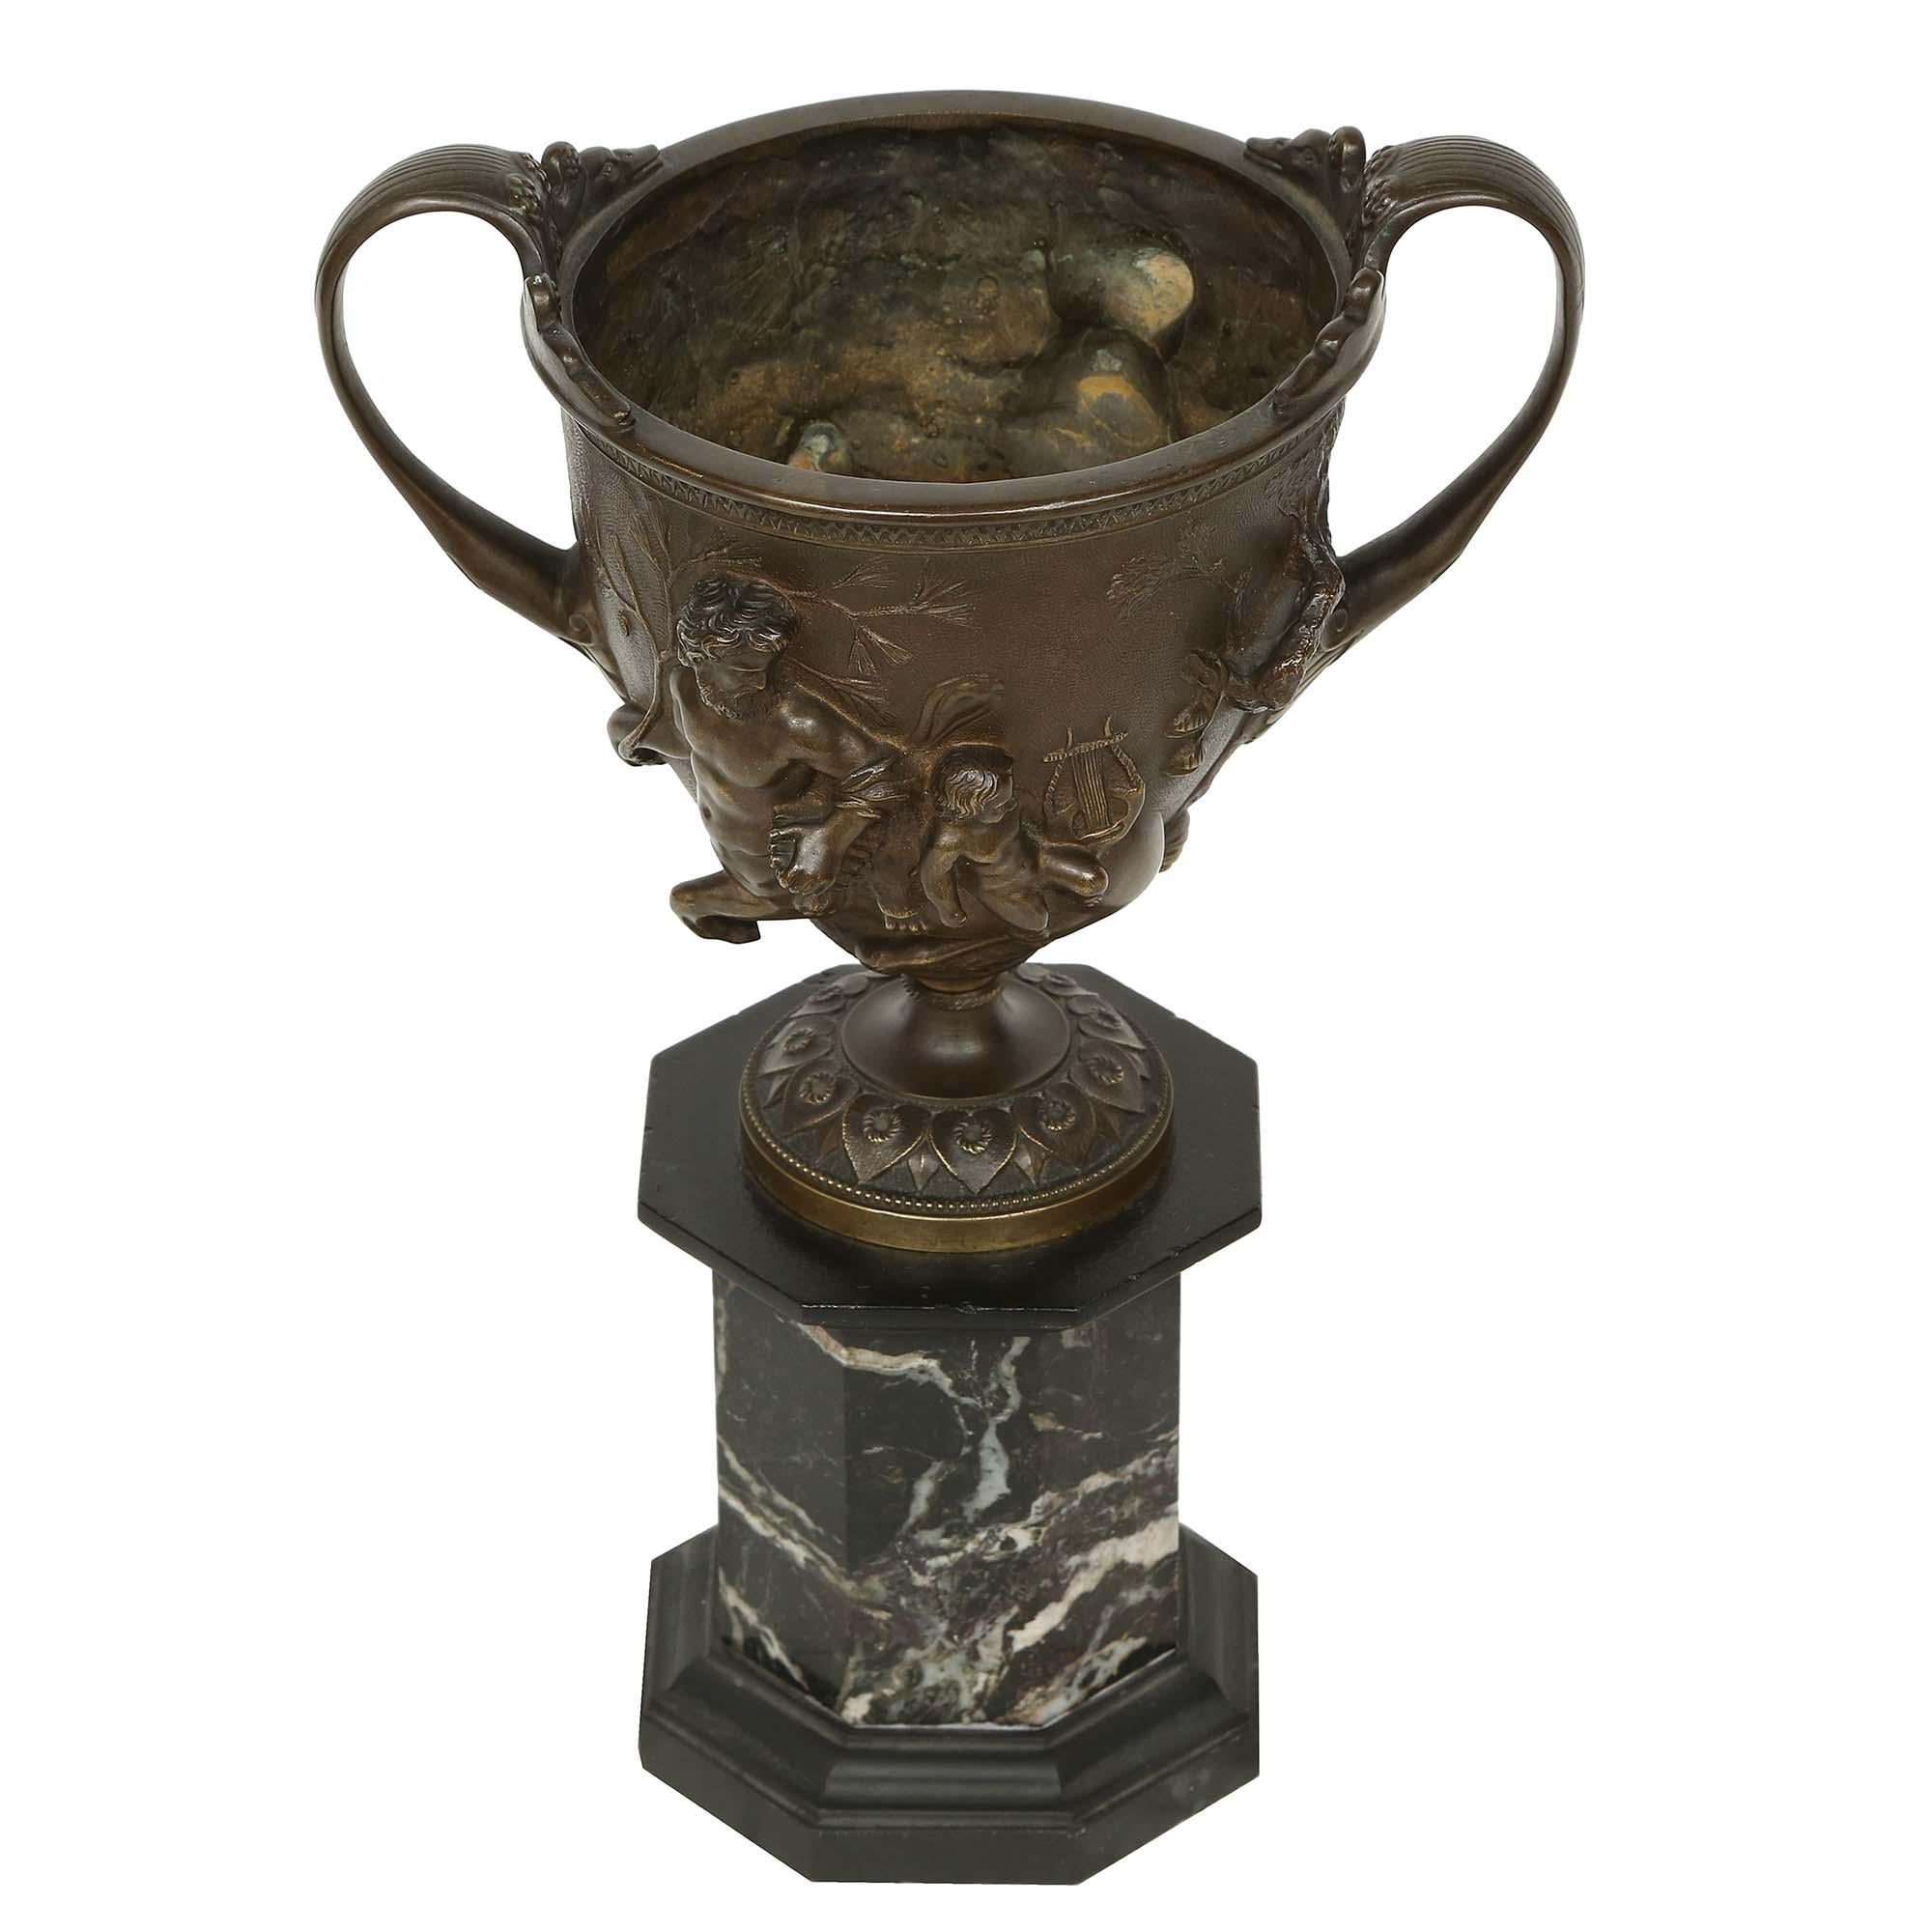 An extremely fine French 19th century patinated bronze tazza which is raised by an impressive octagonal shaped black Belgian marble base. Above the base is a circular support with a water leaf design. The tazza is flanked by large handles while both